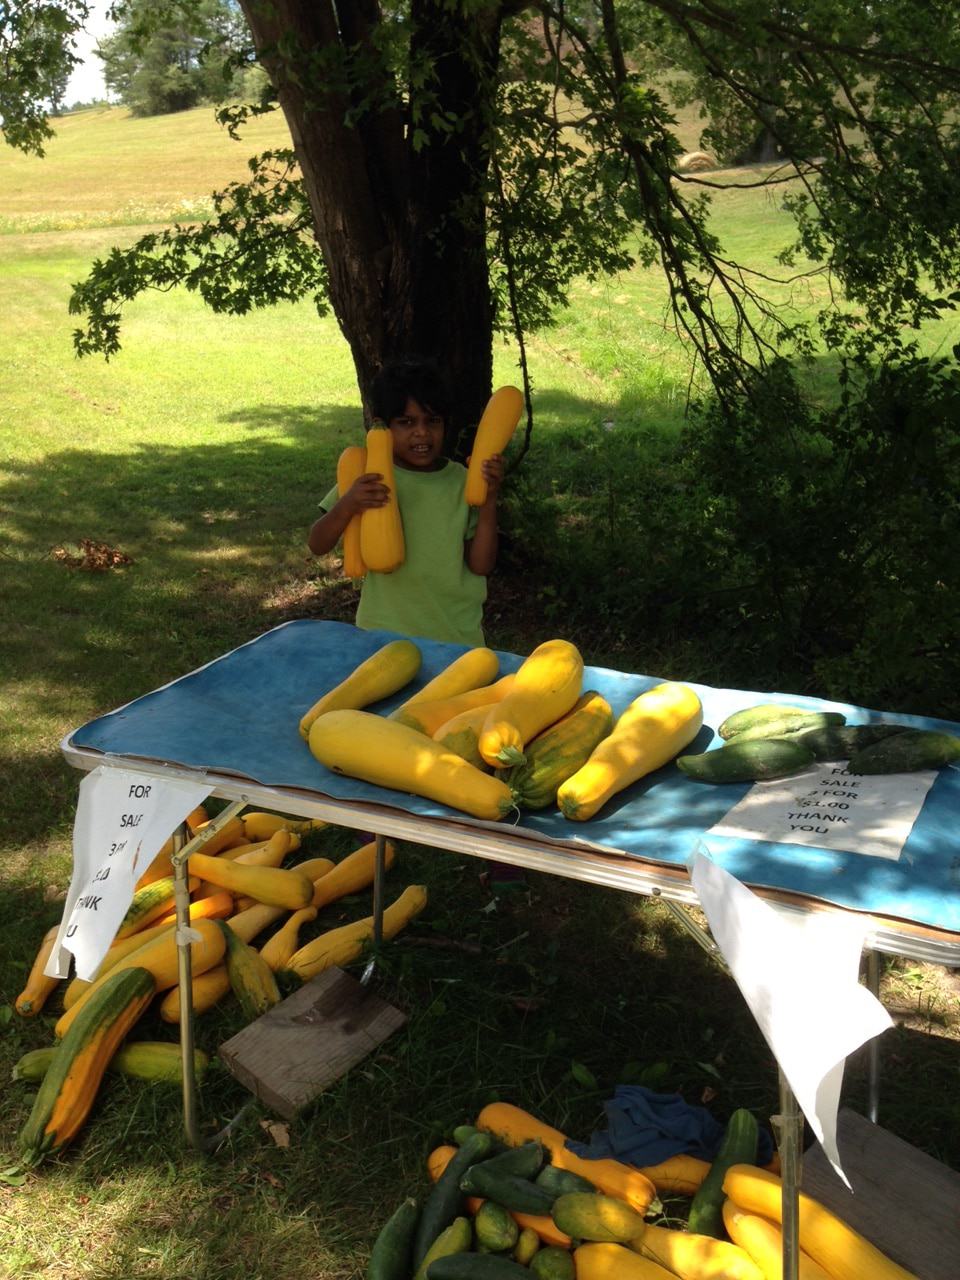 Boy holding up yellow squash with more squash on a table in front of him.